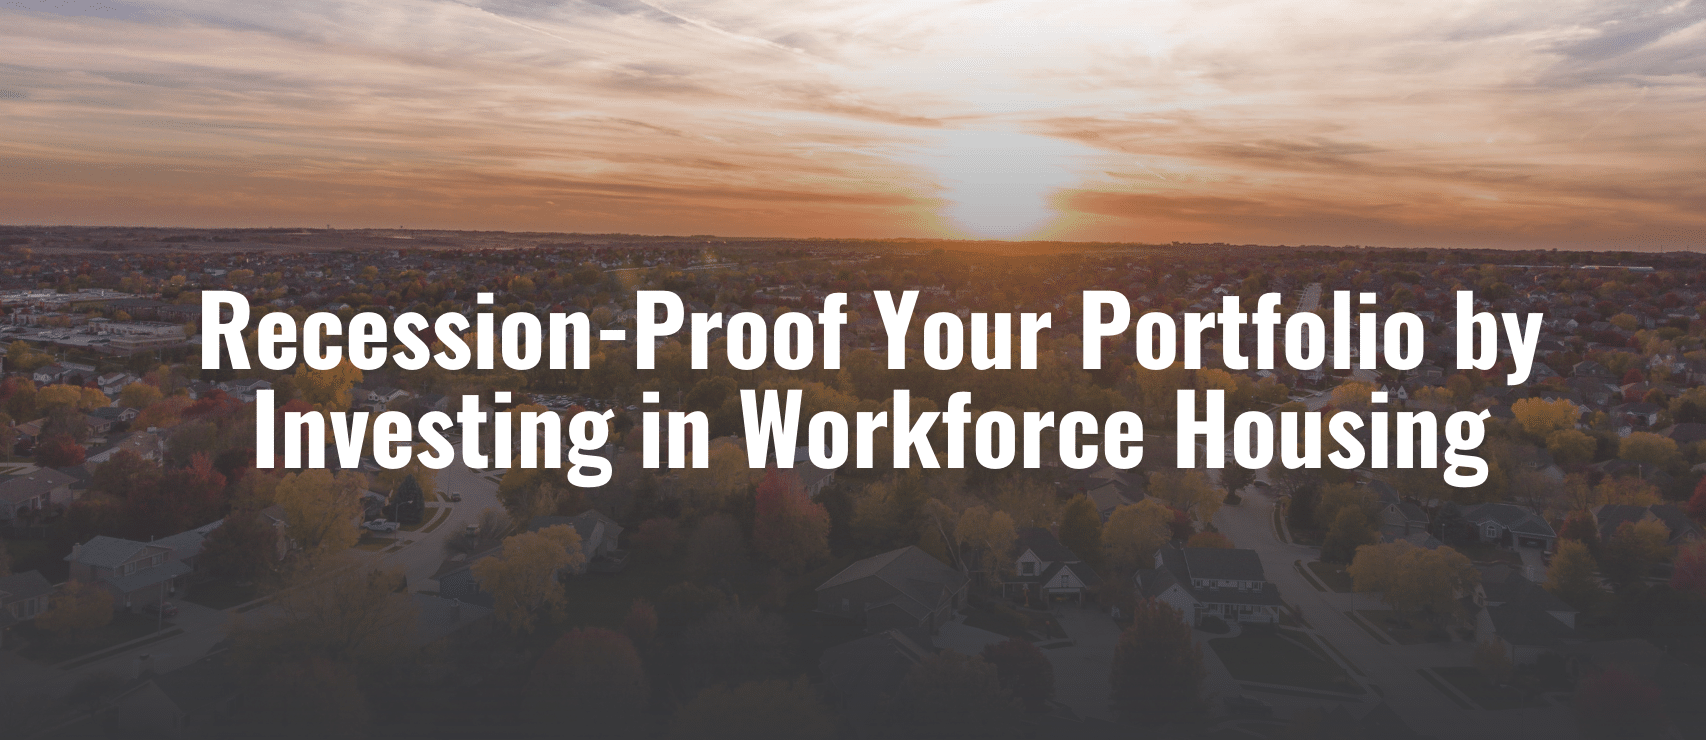 Recession-proof your Portfolio by Investing in Workforce Housing